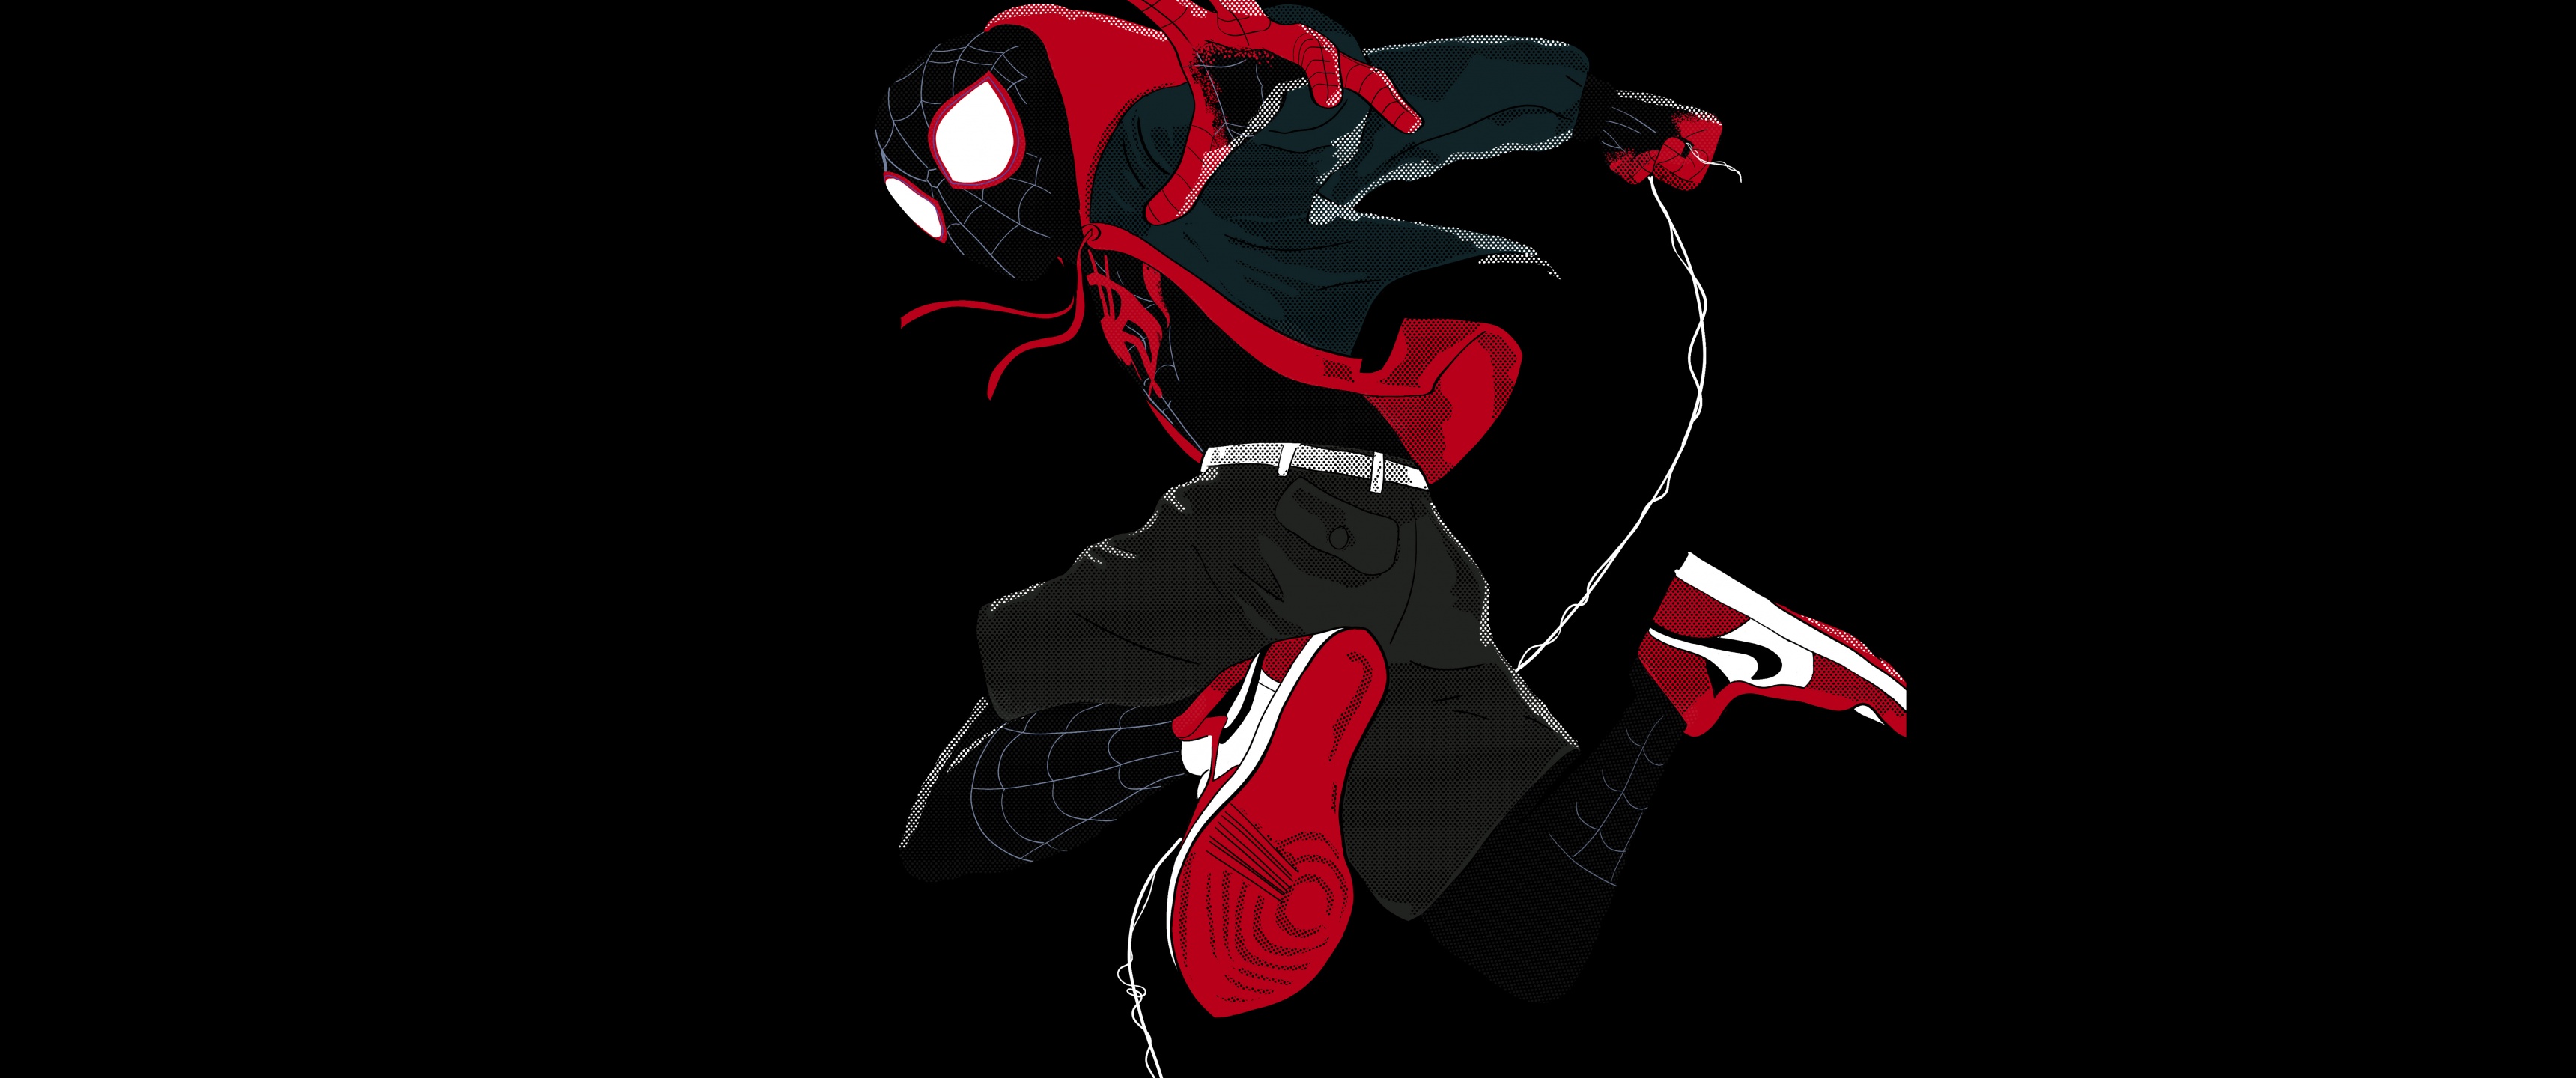 Upscaled to 4k and edited Miles Morales wallpaper  rSpiderman